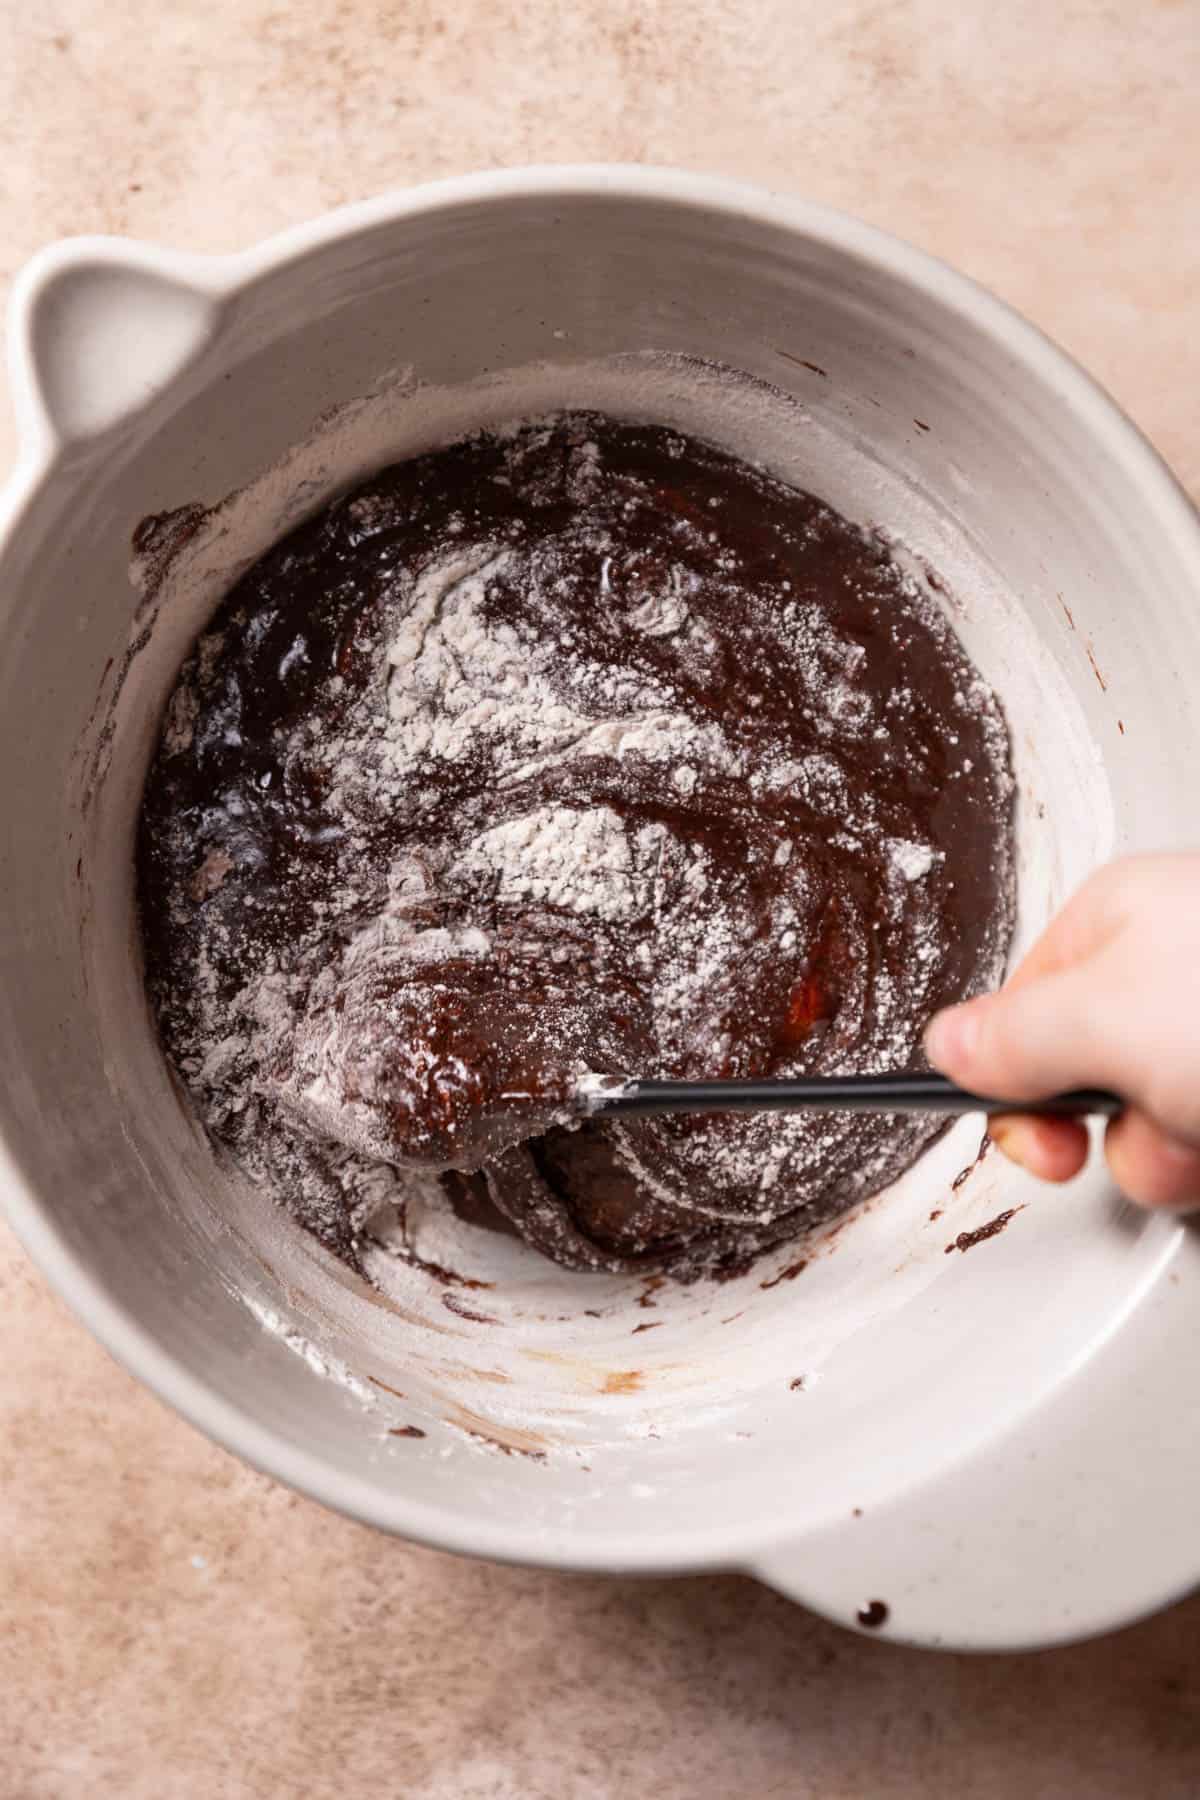 folding the dry ingredients into the brownie batter.